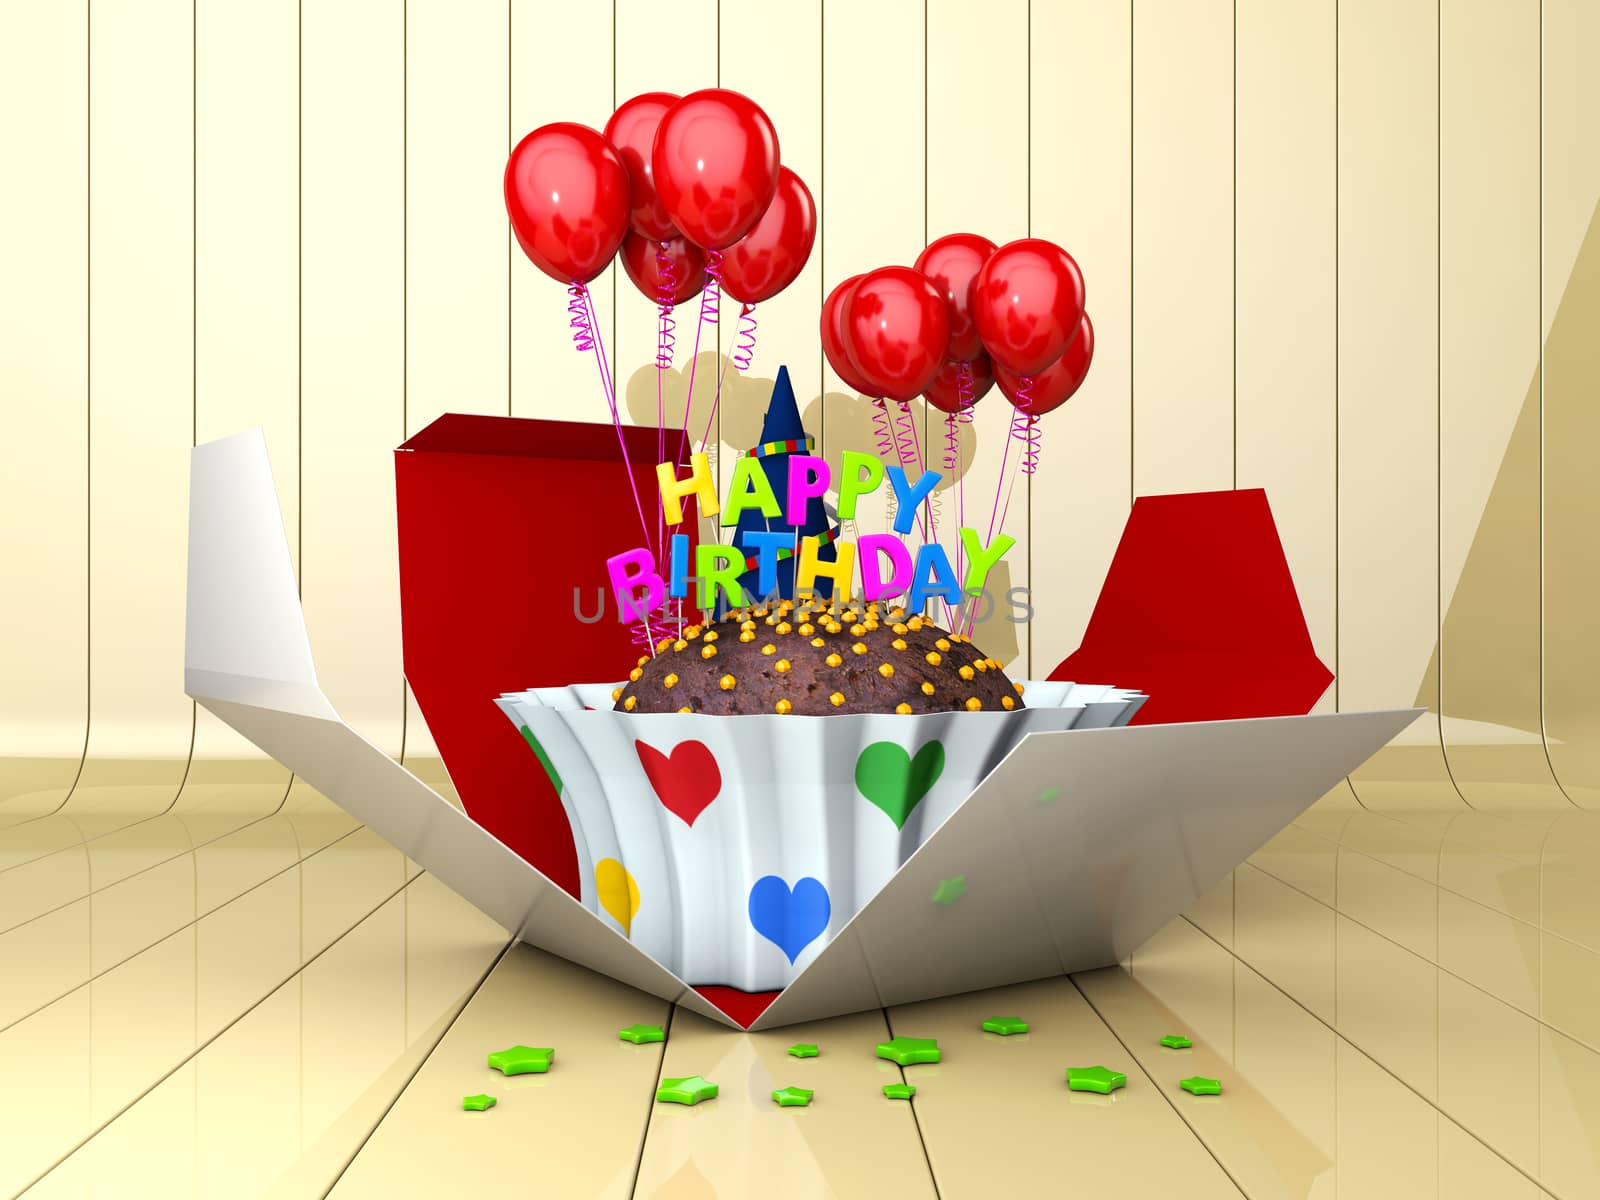 3d Illustration of Birthday cake with red balloons by tussik